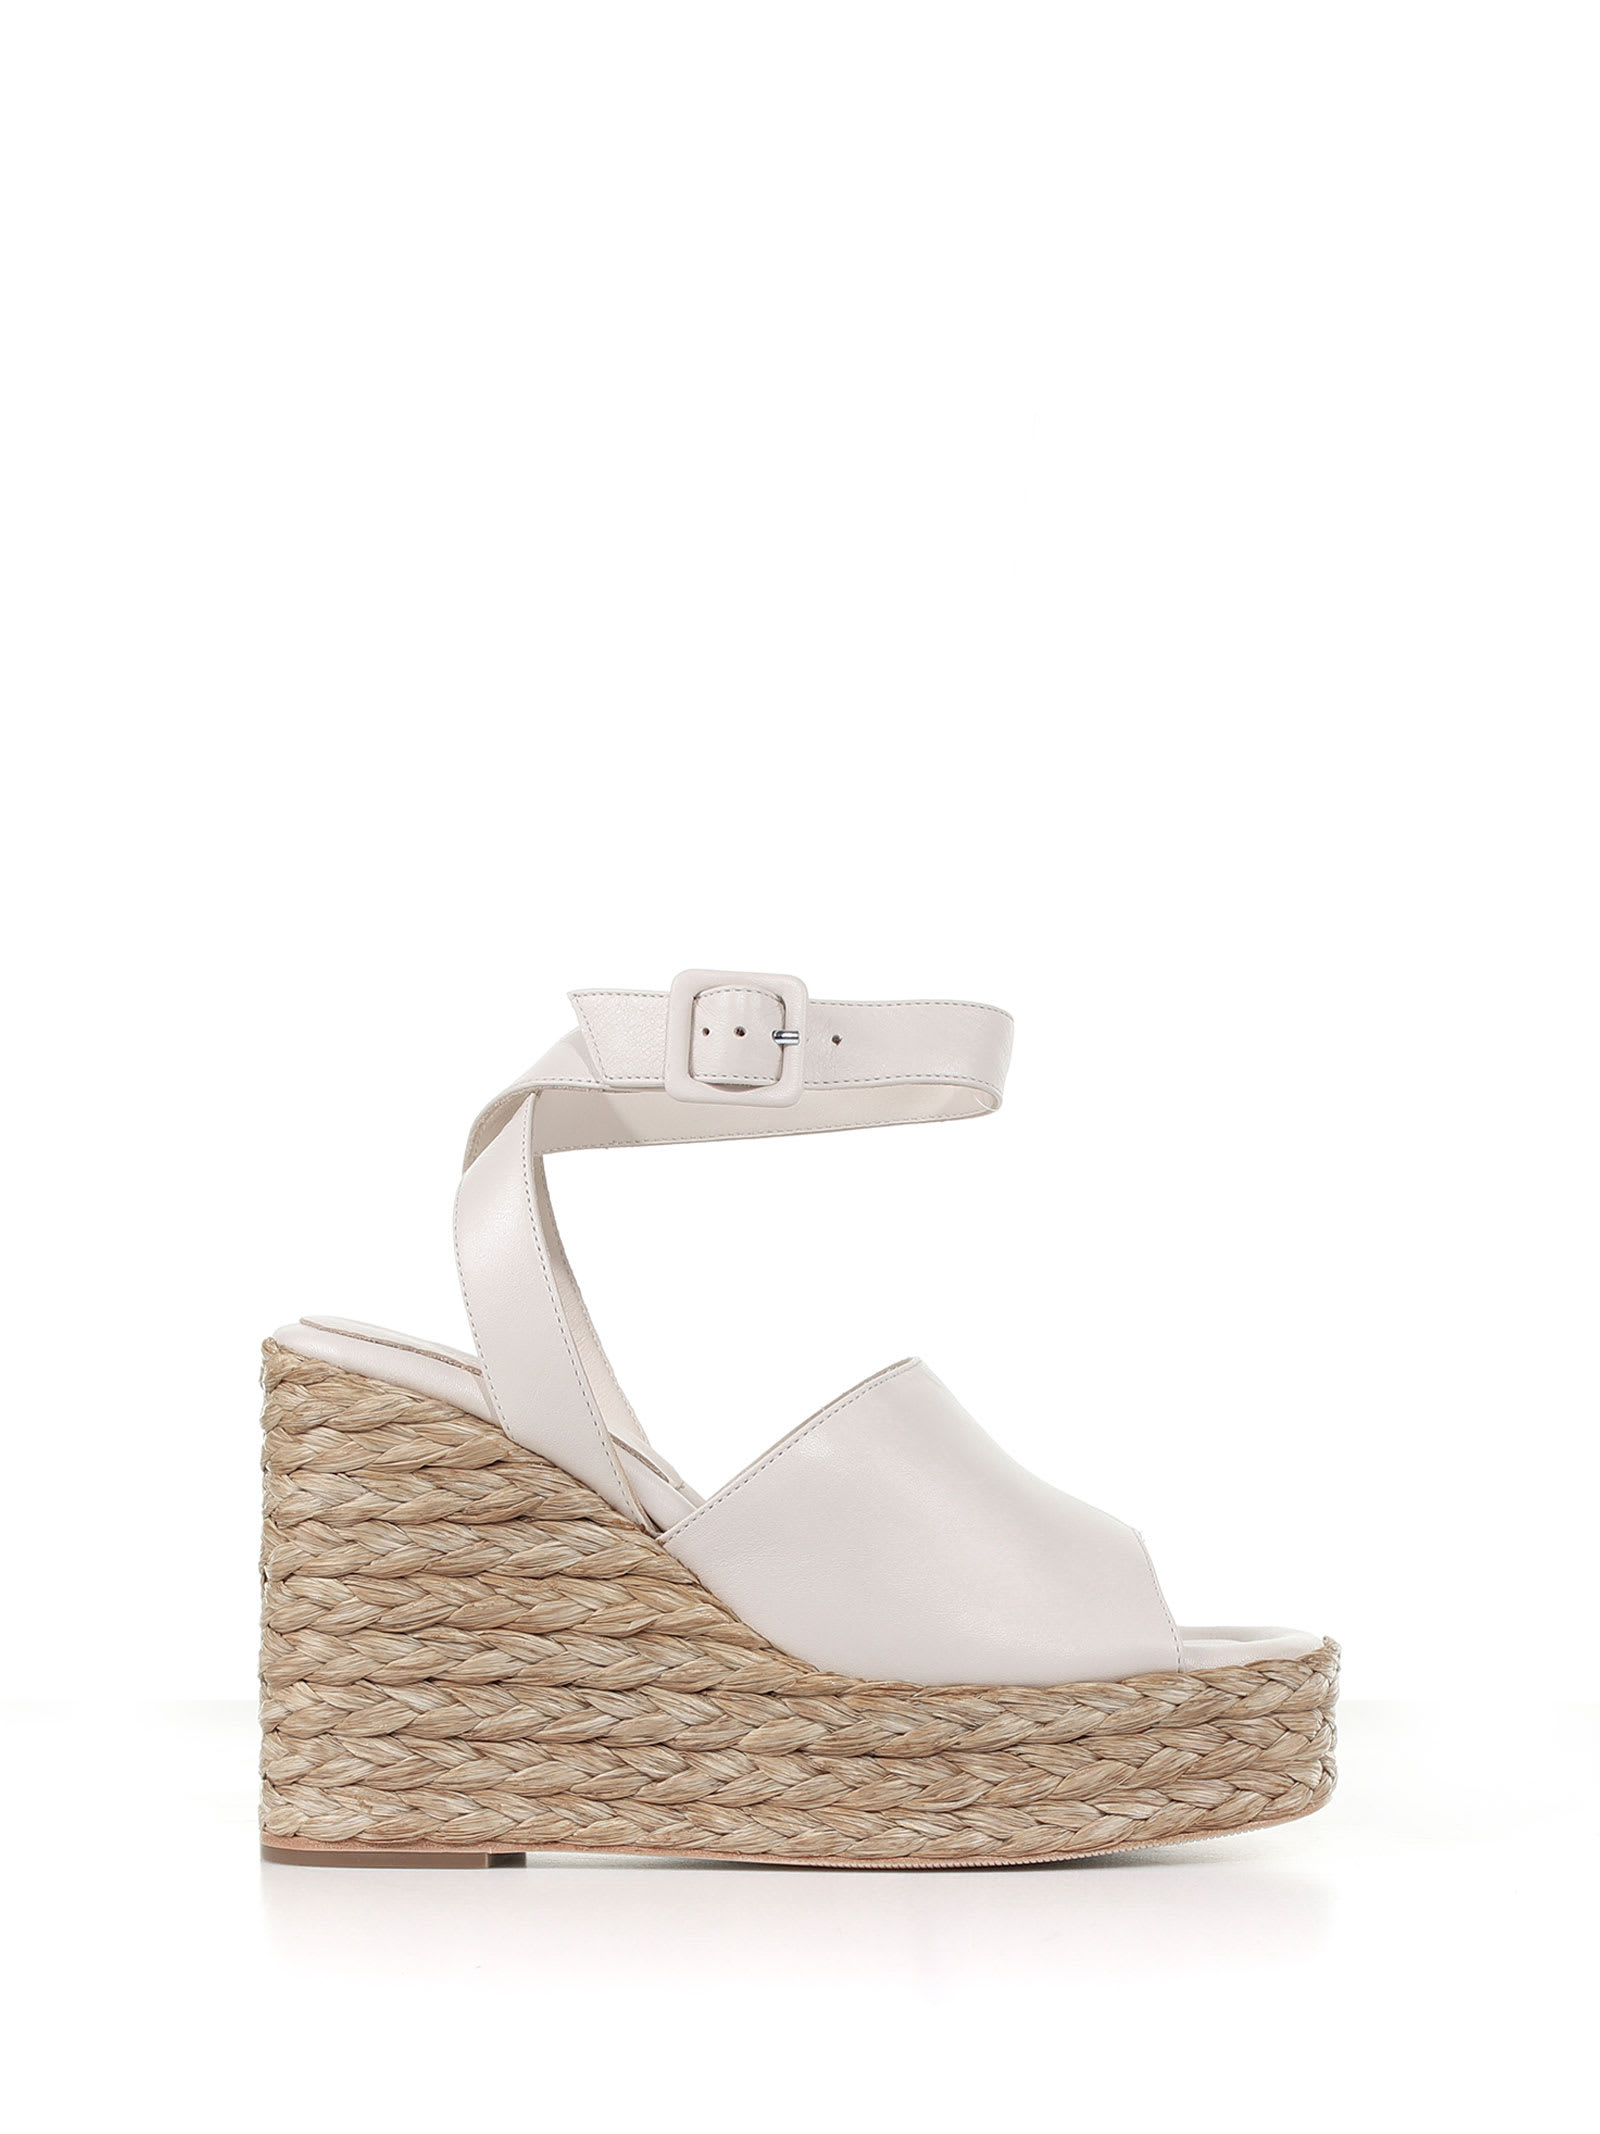 Paloma Barceló Clama Sandal With Rope Wedge